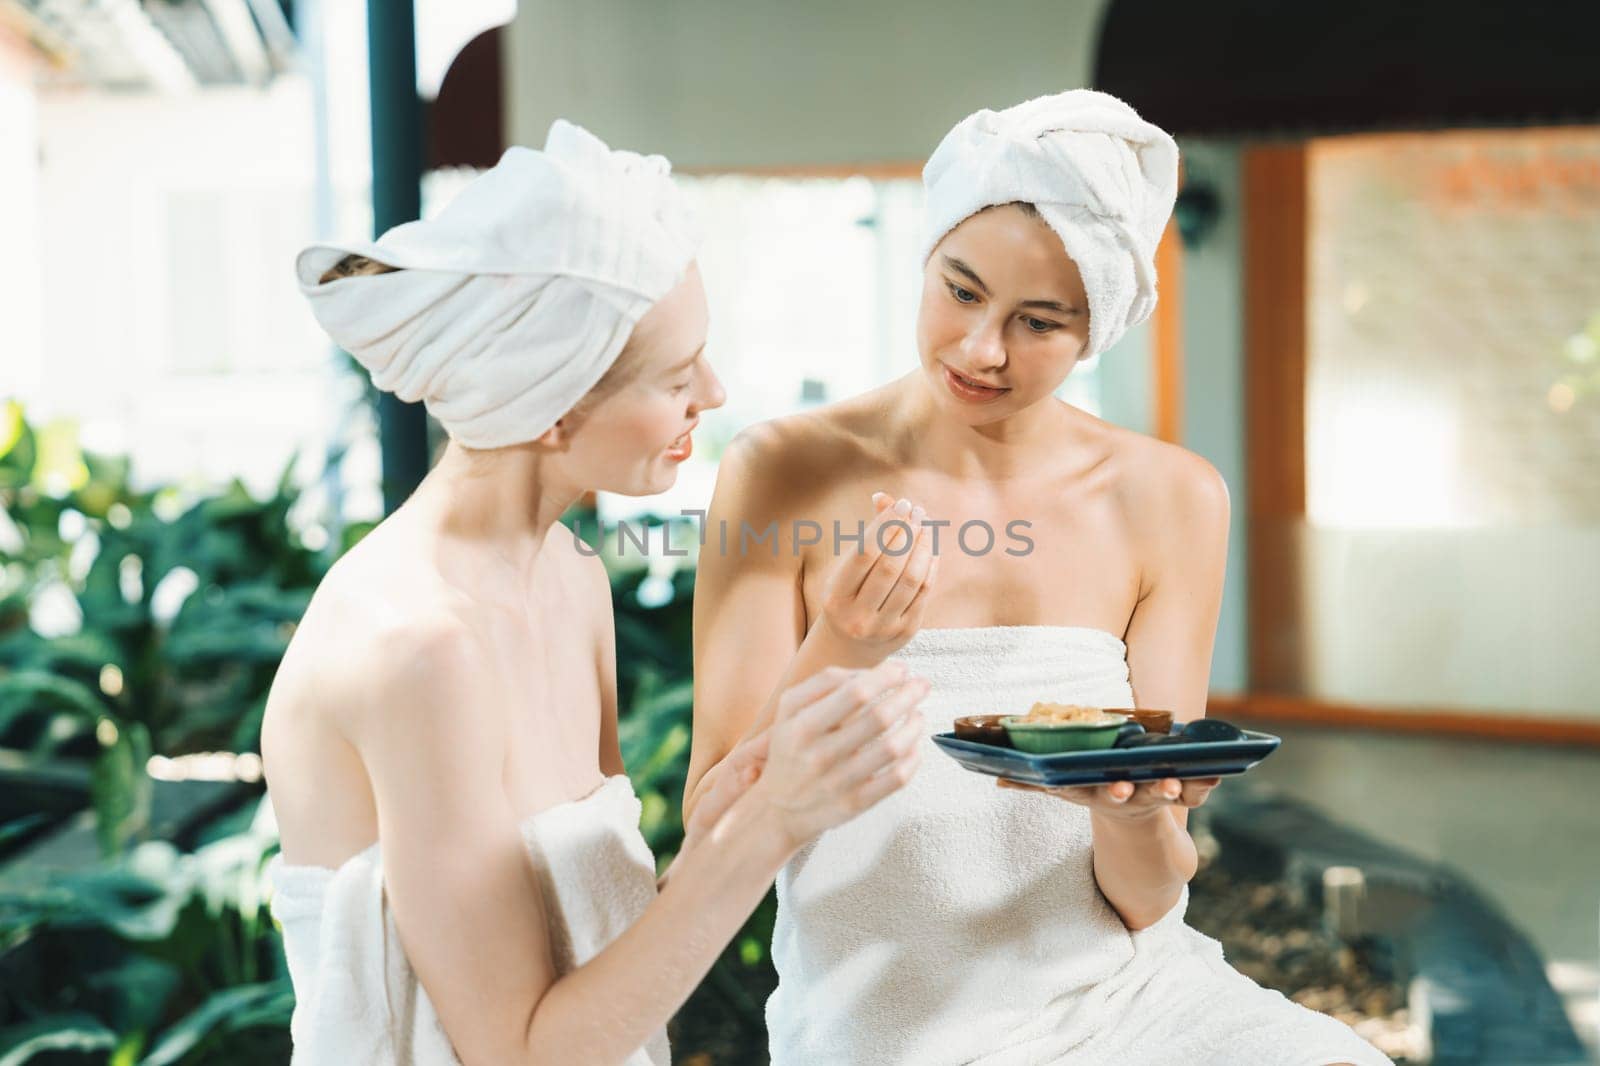 Portrait of two attractive woman in towel giggling during hold the herbal bowl surrounded by natural spa environment. Pretty girls with beautiful skin using herbal scrub at spa salon.Tranquility.